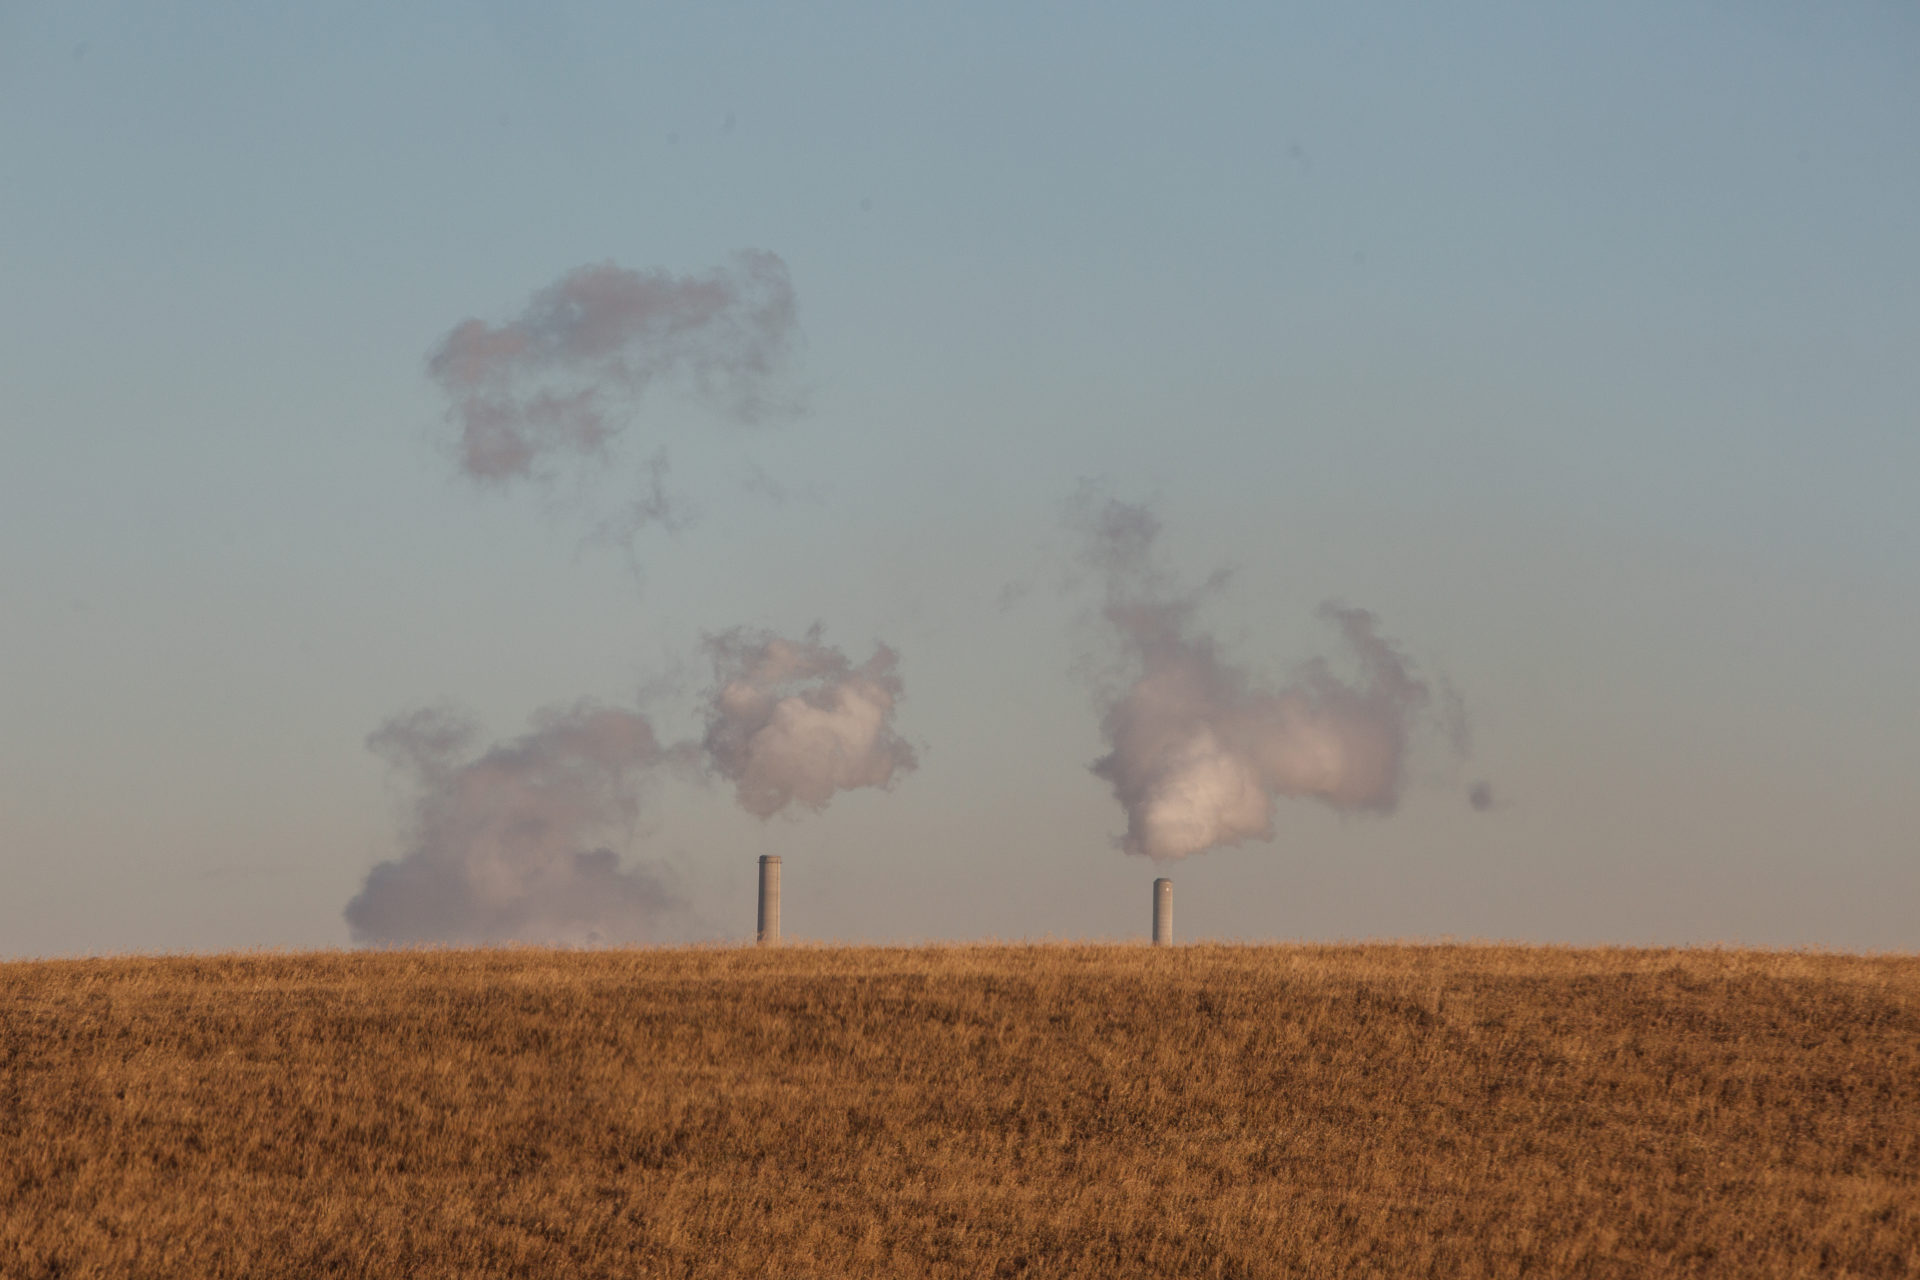 An Alberta coal plant, Keephills Power Station, is just visible behind a prairie field